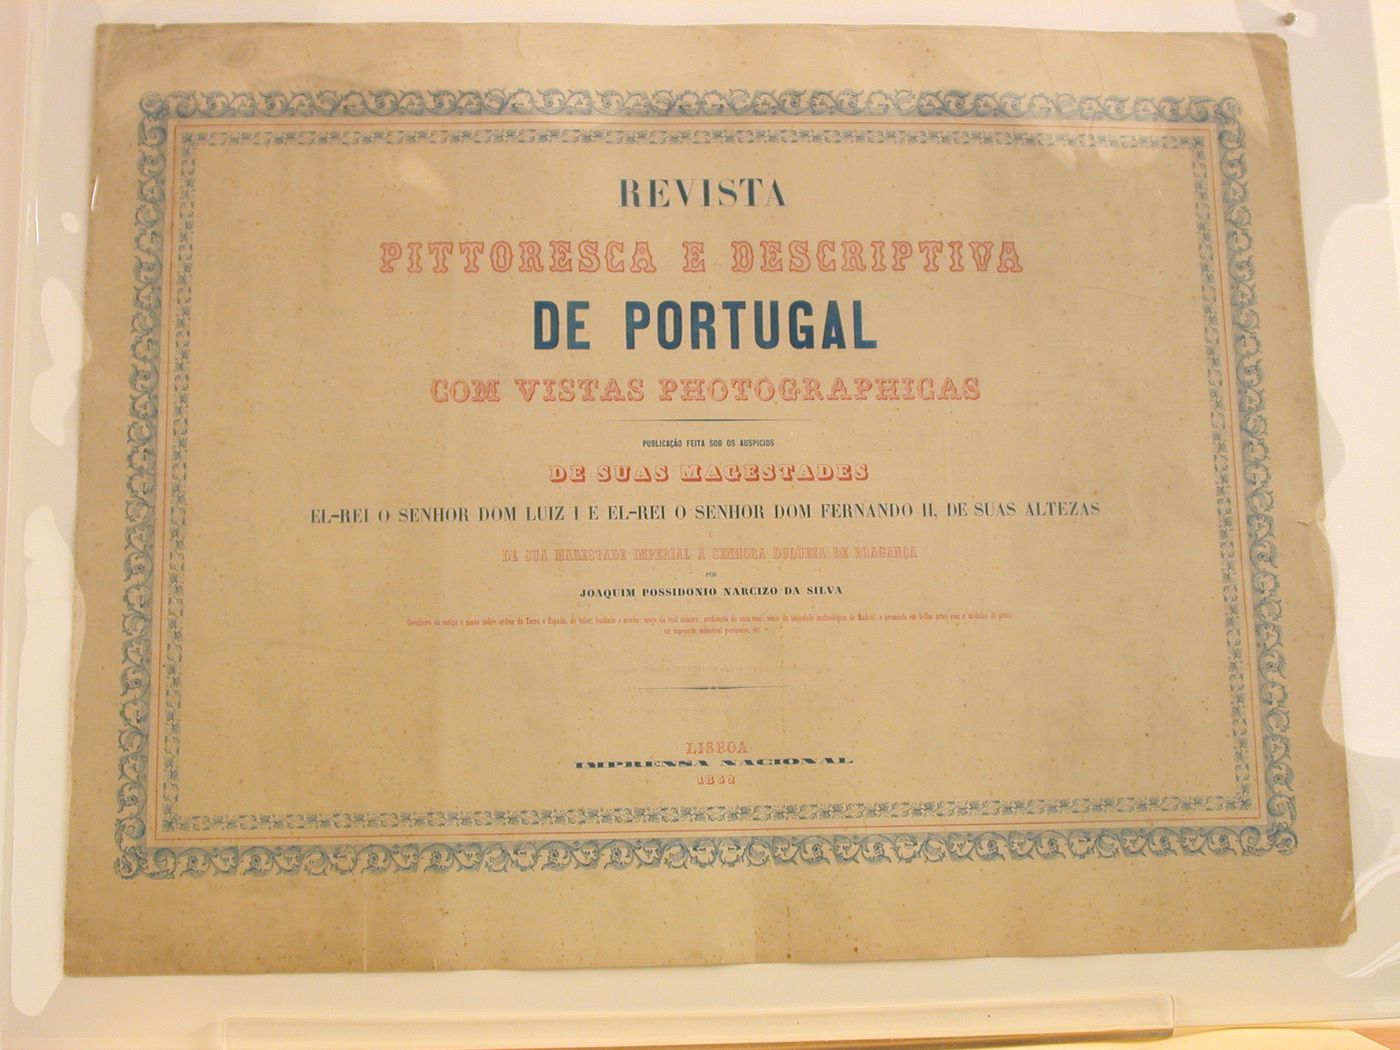 Architectural views of buildings and over views in various cities, with printed columns of text on pages, Portugal